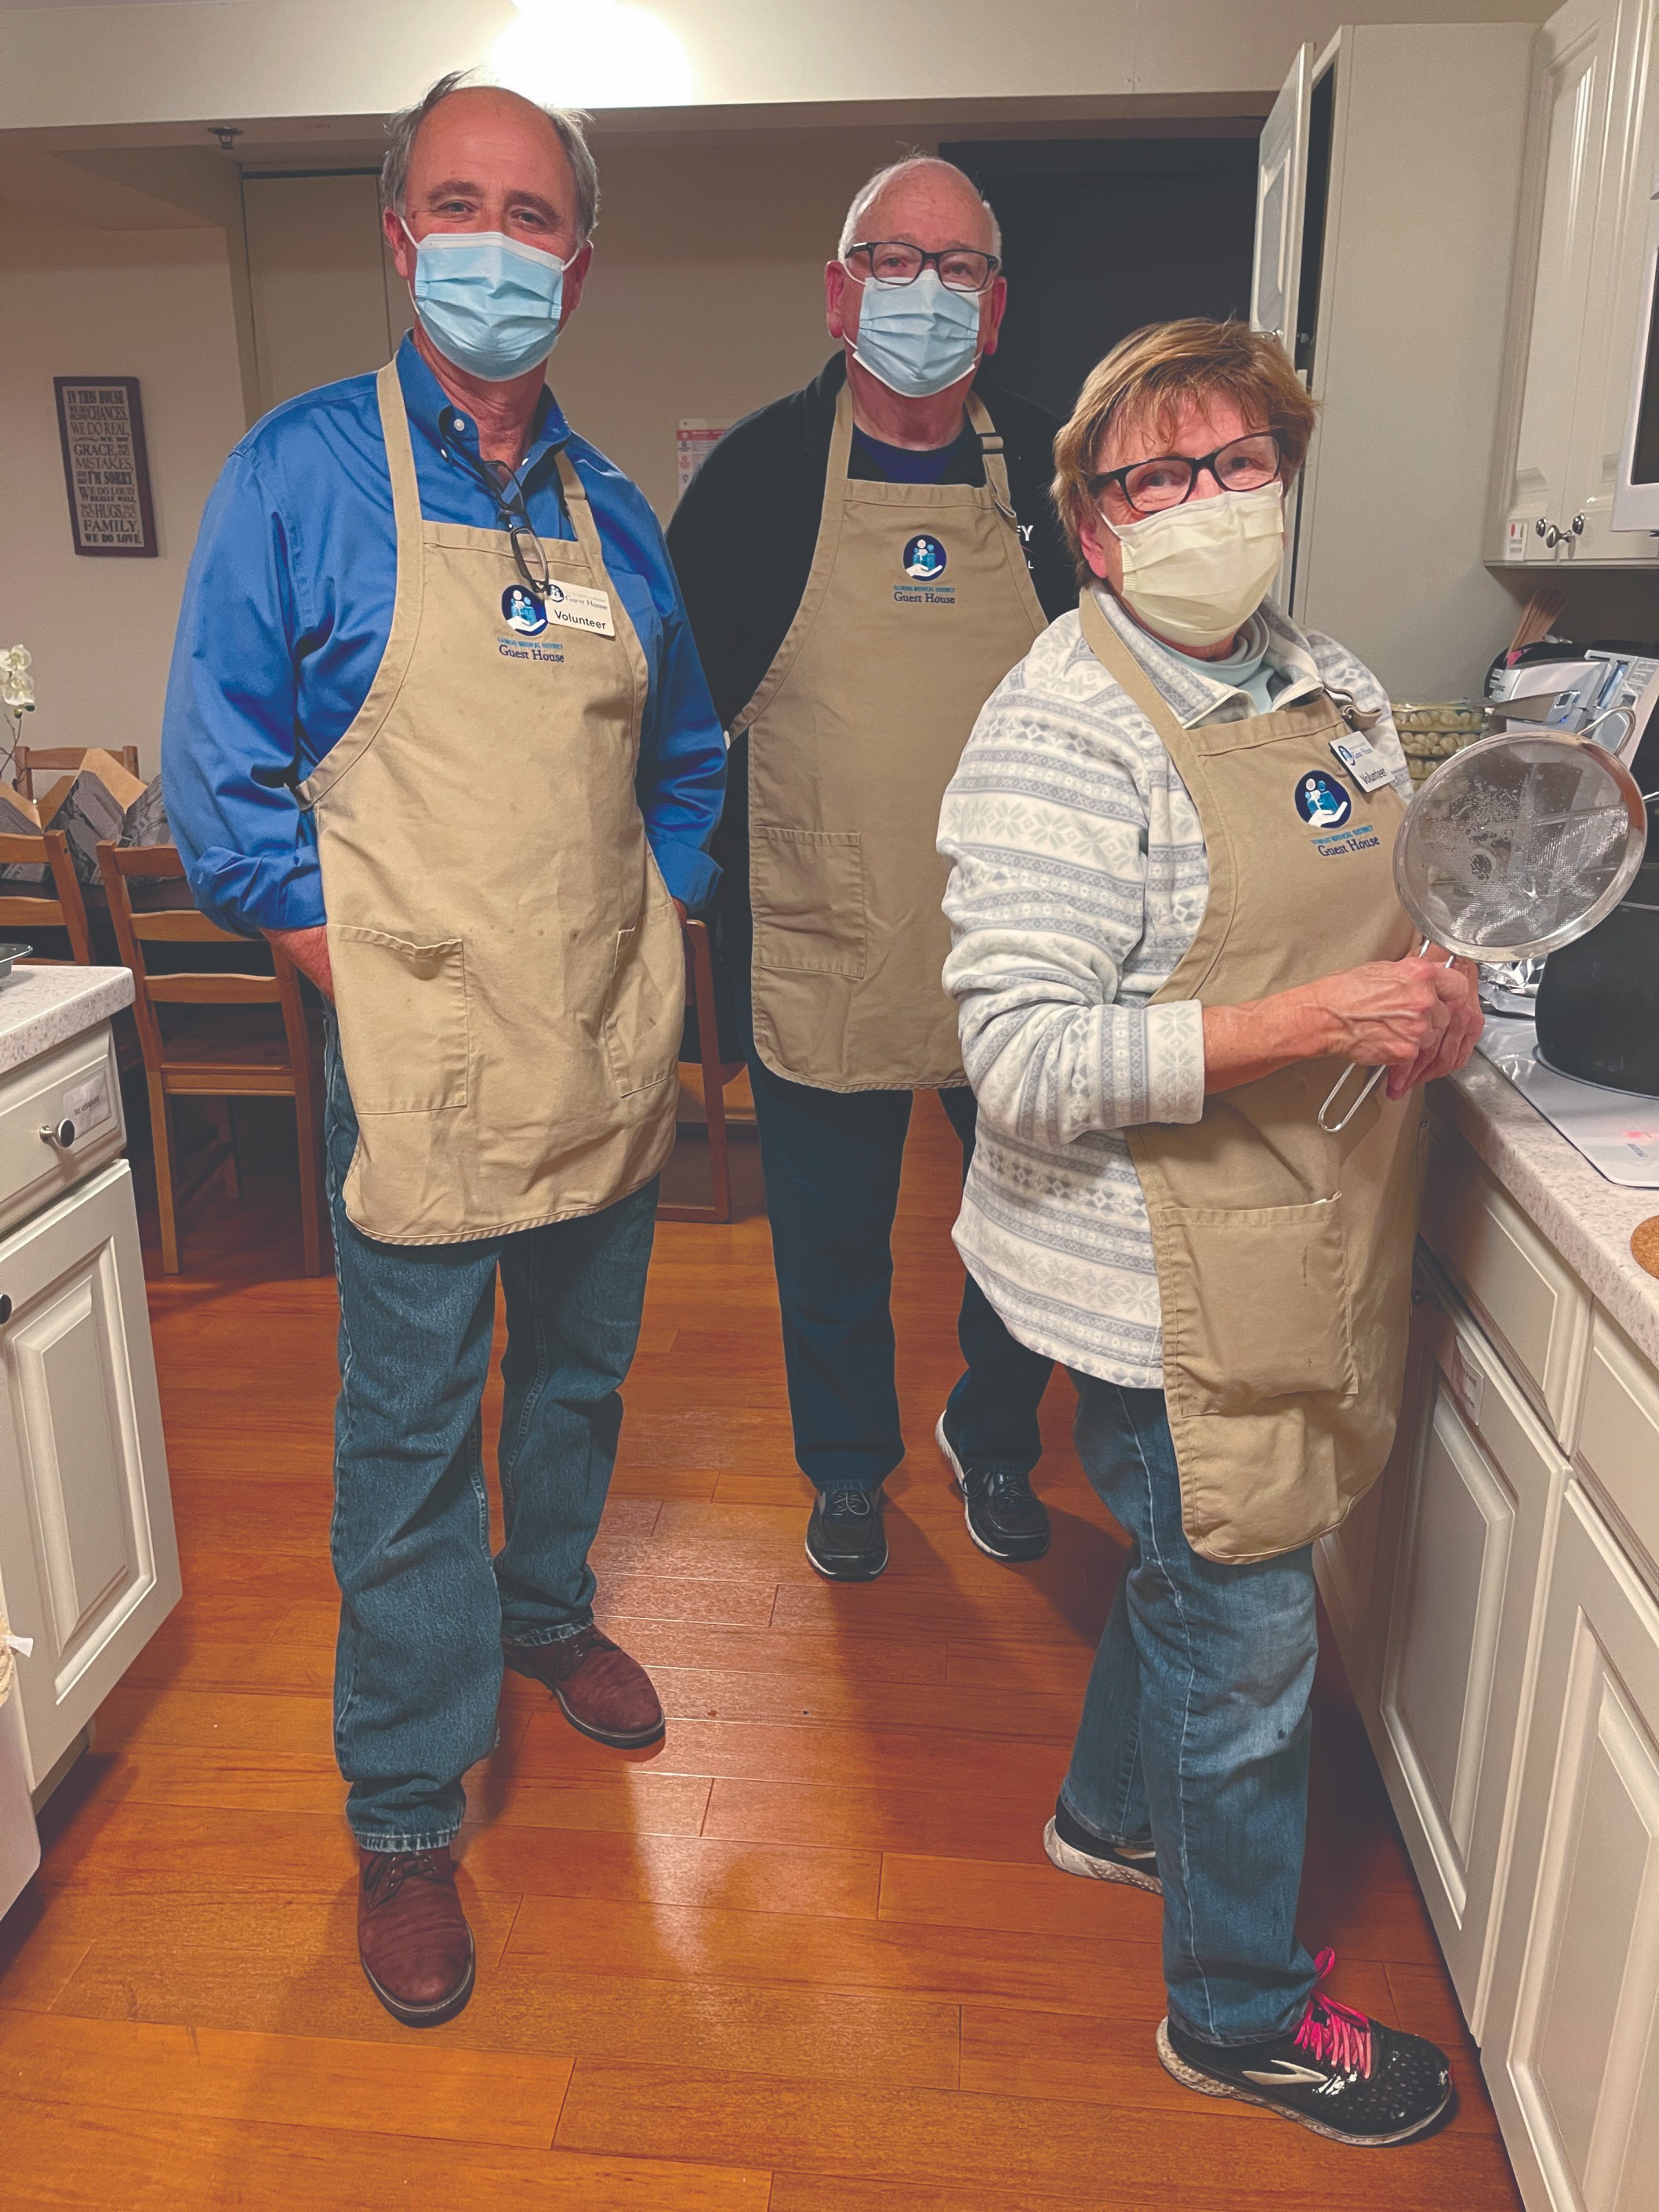 Three voluneers stand in a kitchen wearing masks and beige aprons embroidered with the Guest House logo.